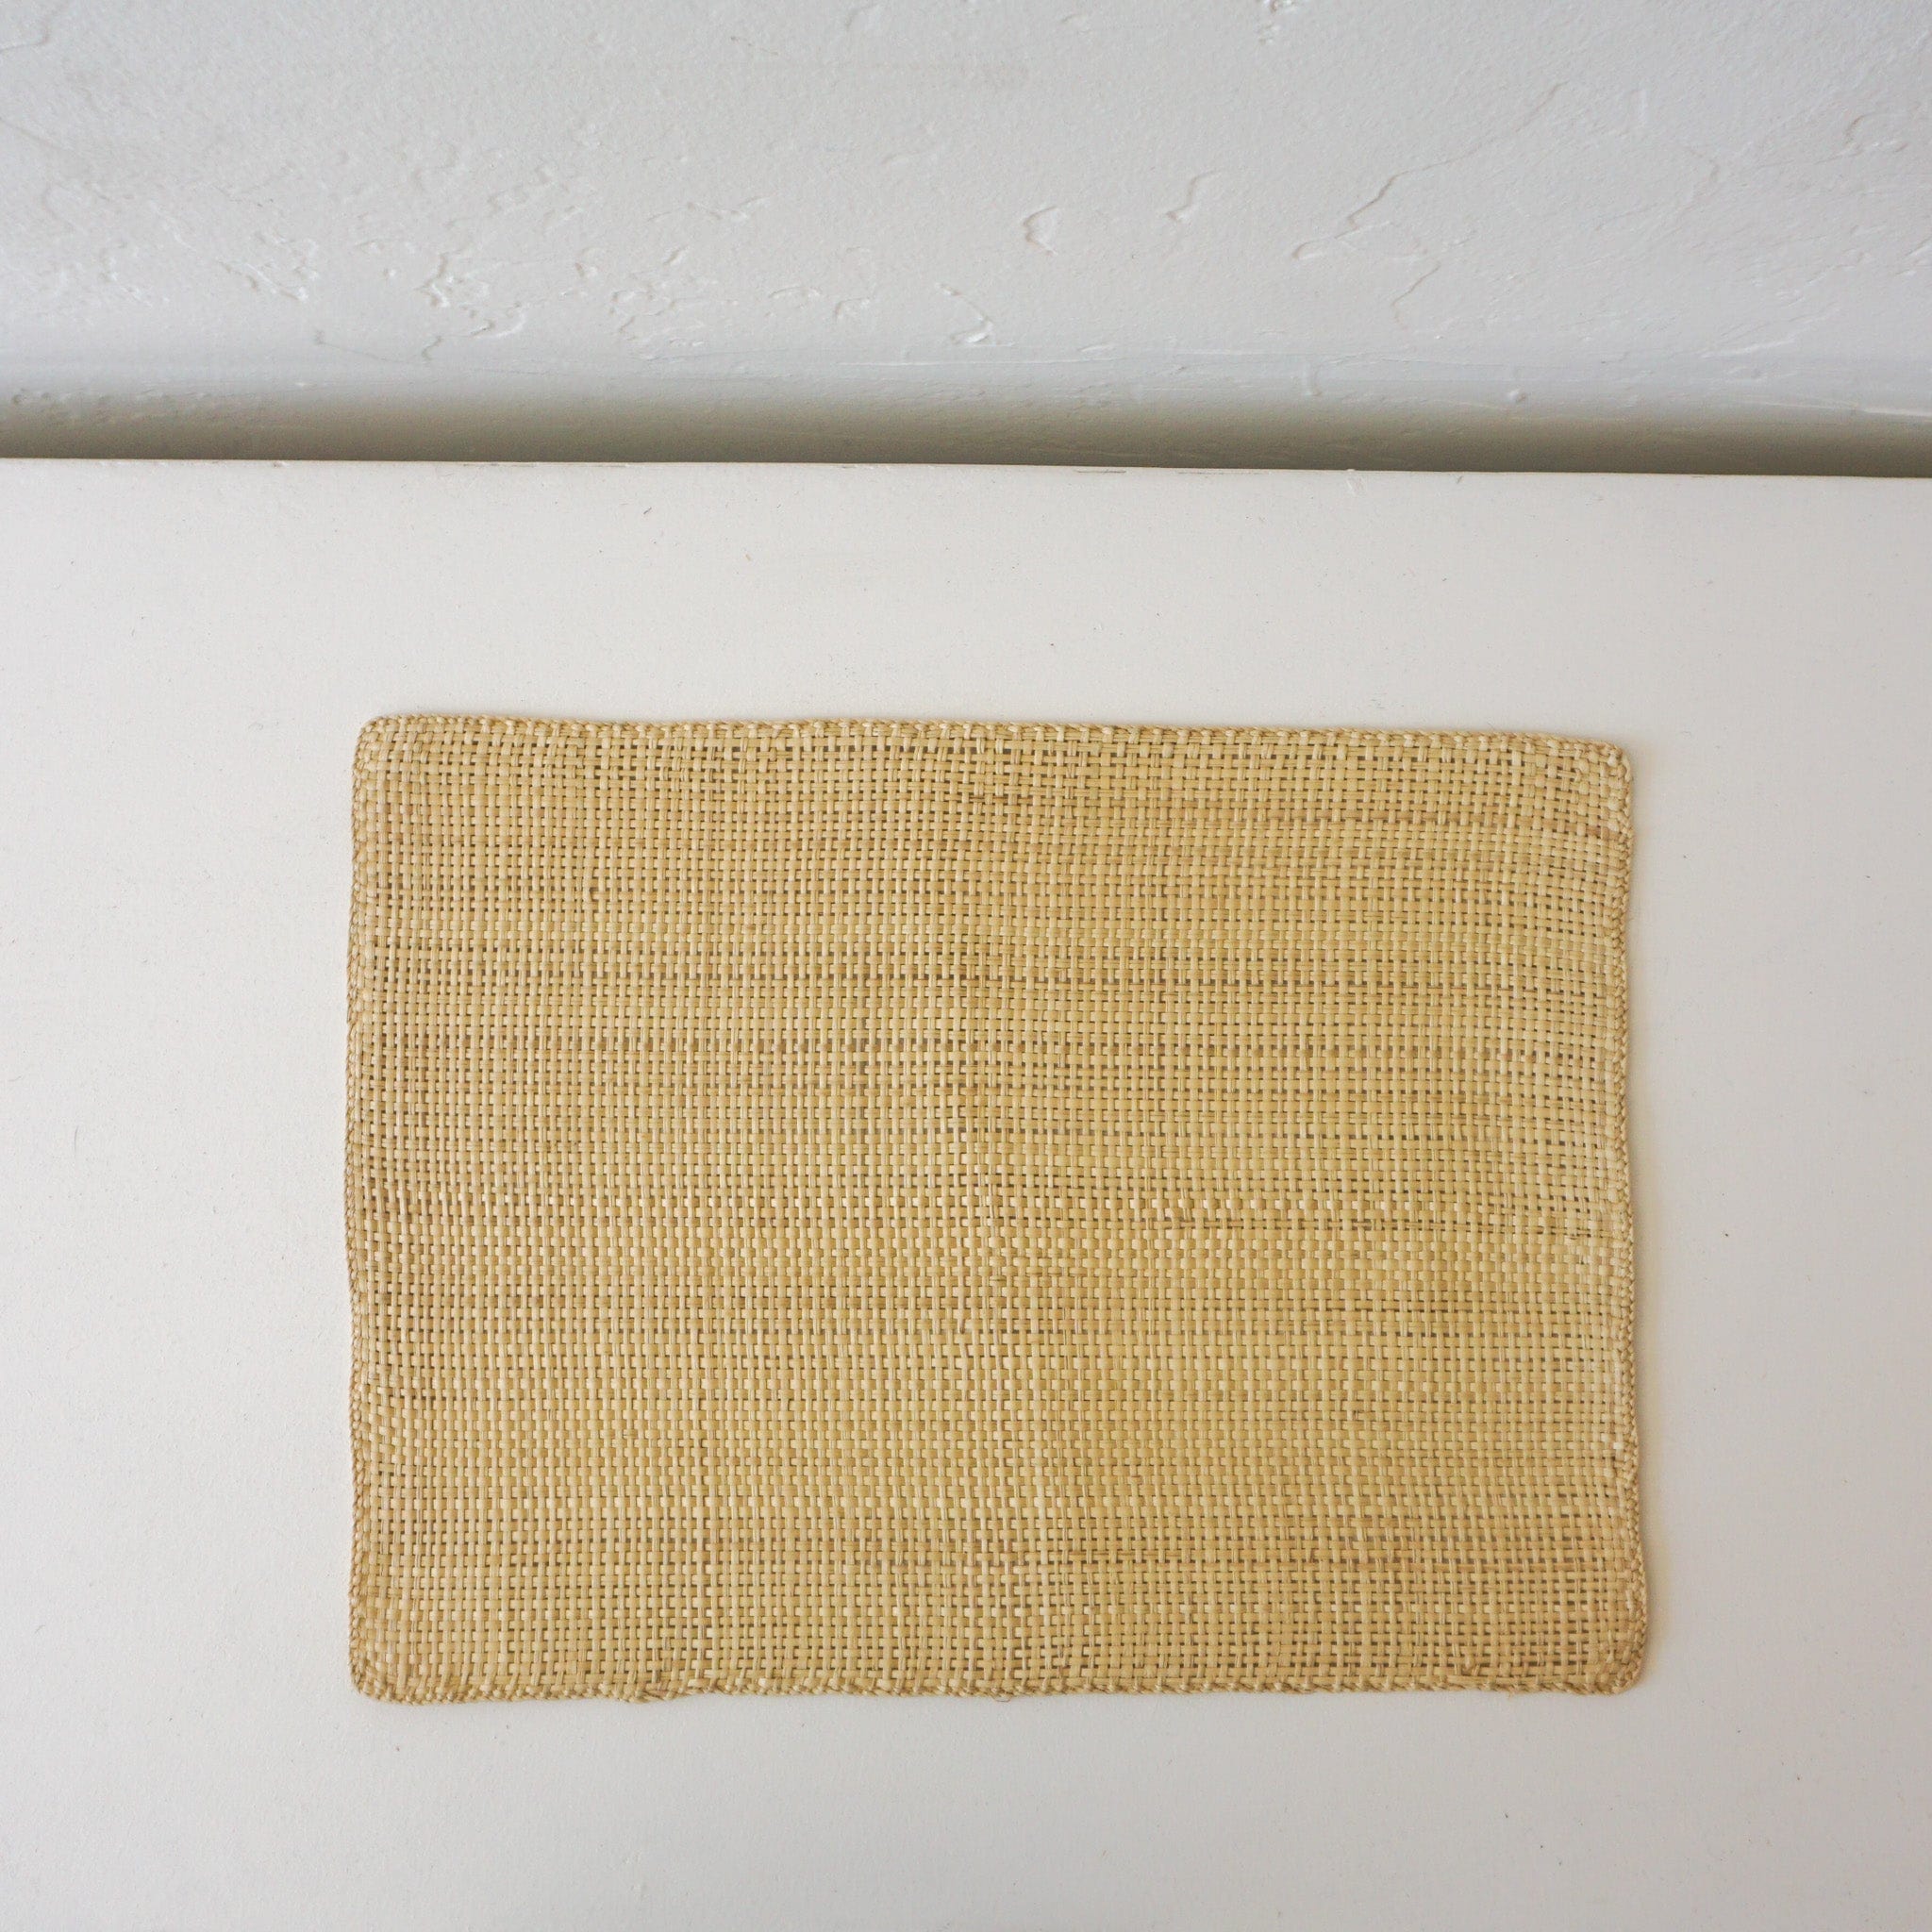 Guanabana Placemats Straw Placemat by Guanabana in Natural